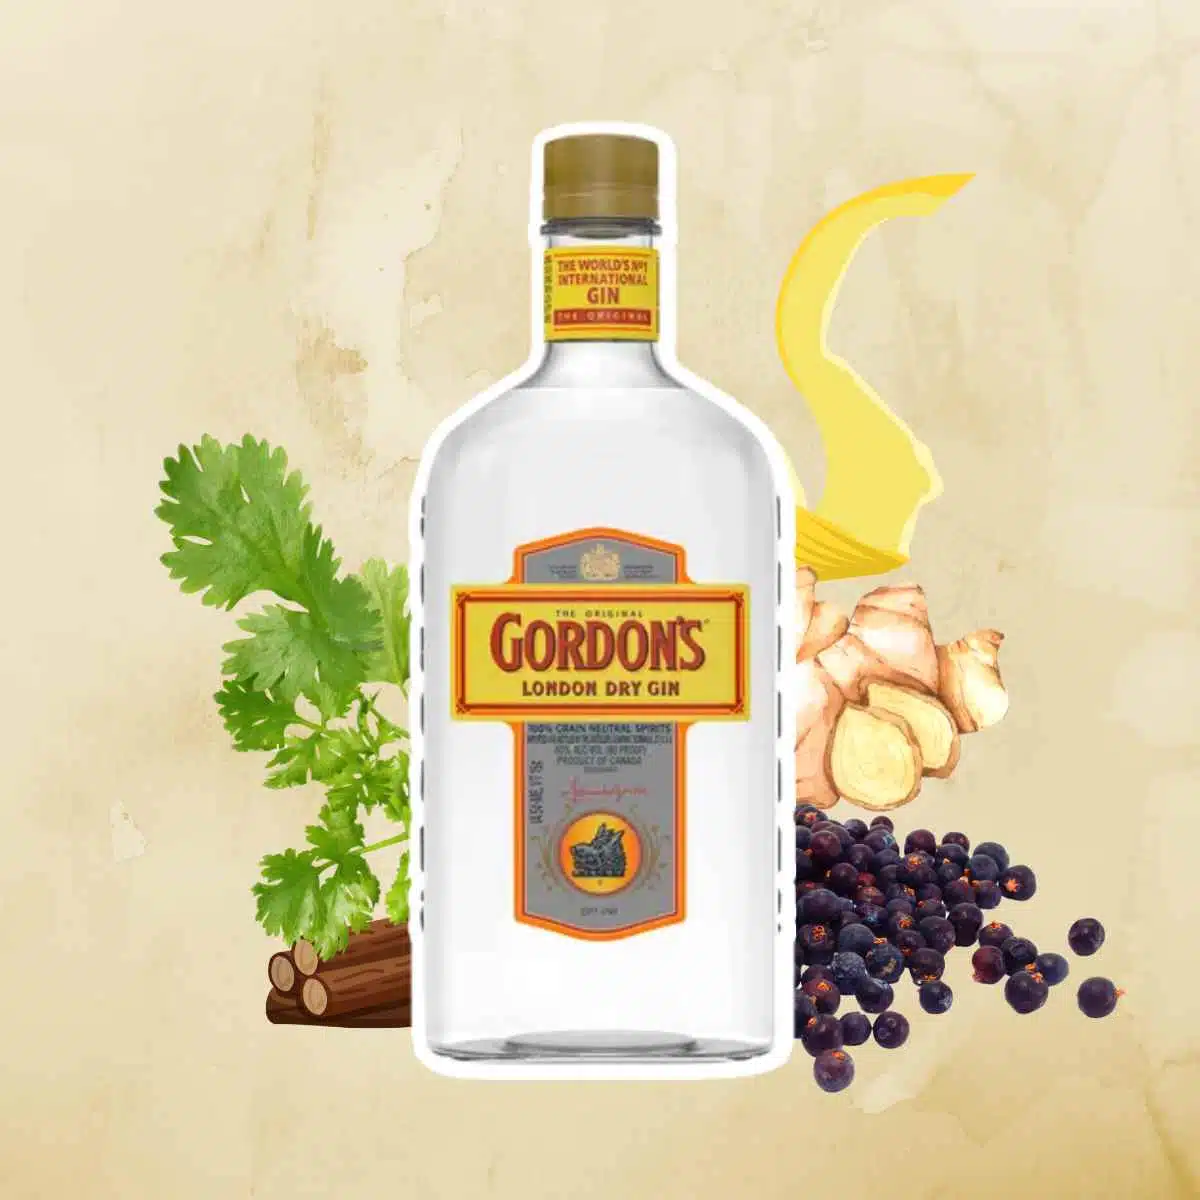 Gordon's Gin - London Dry Gin bottle and ingredients